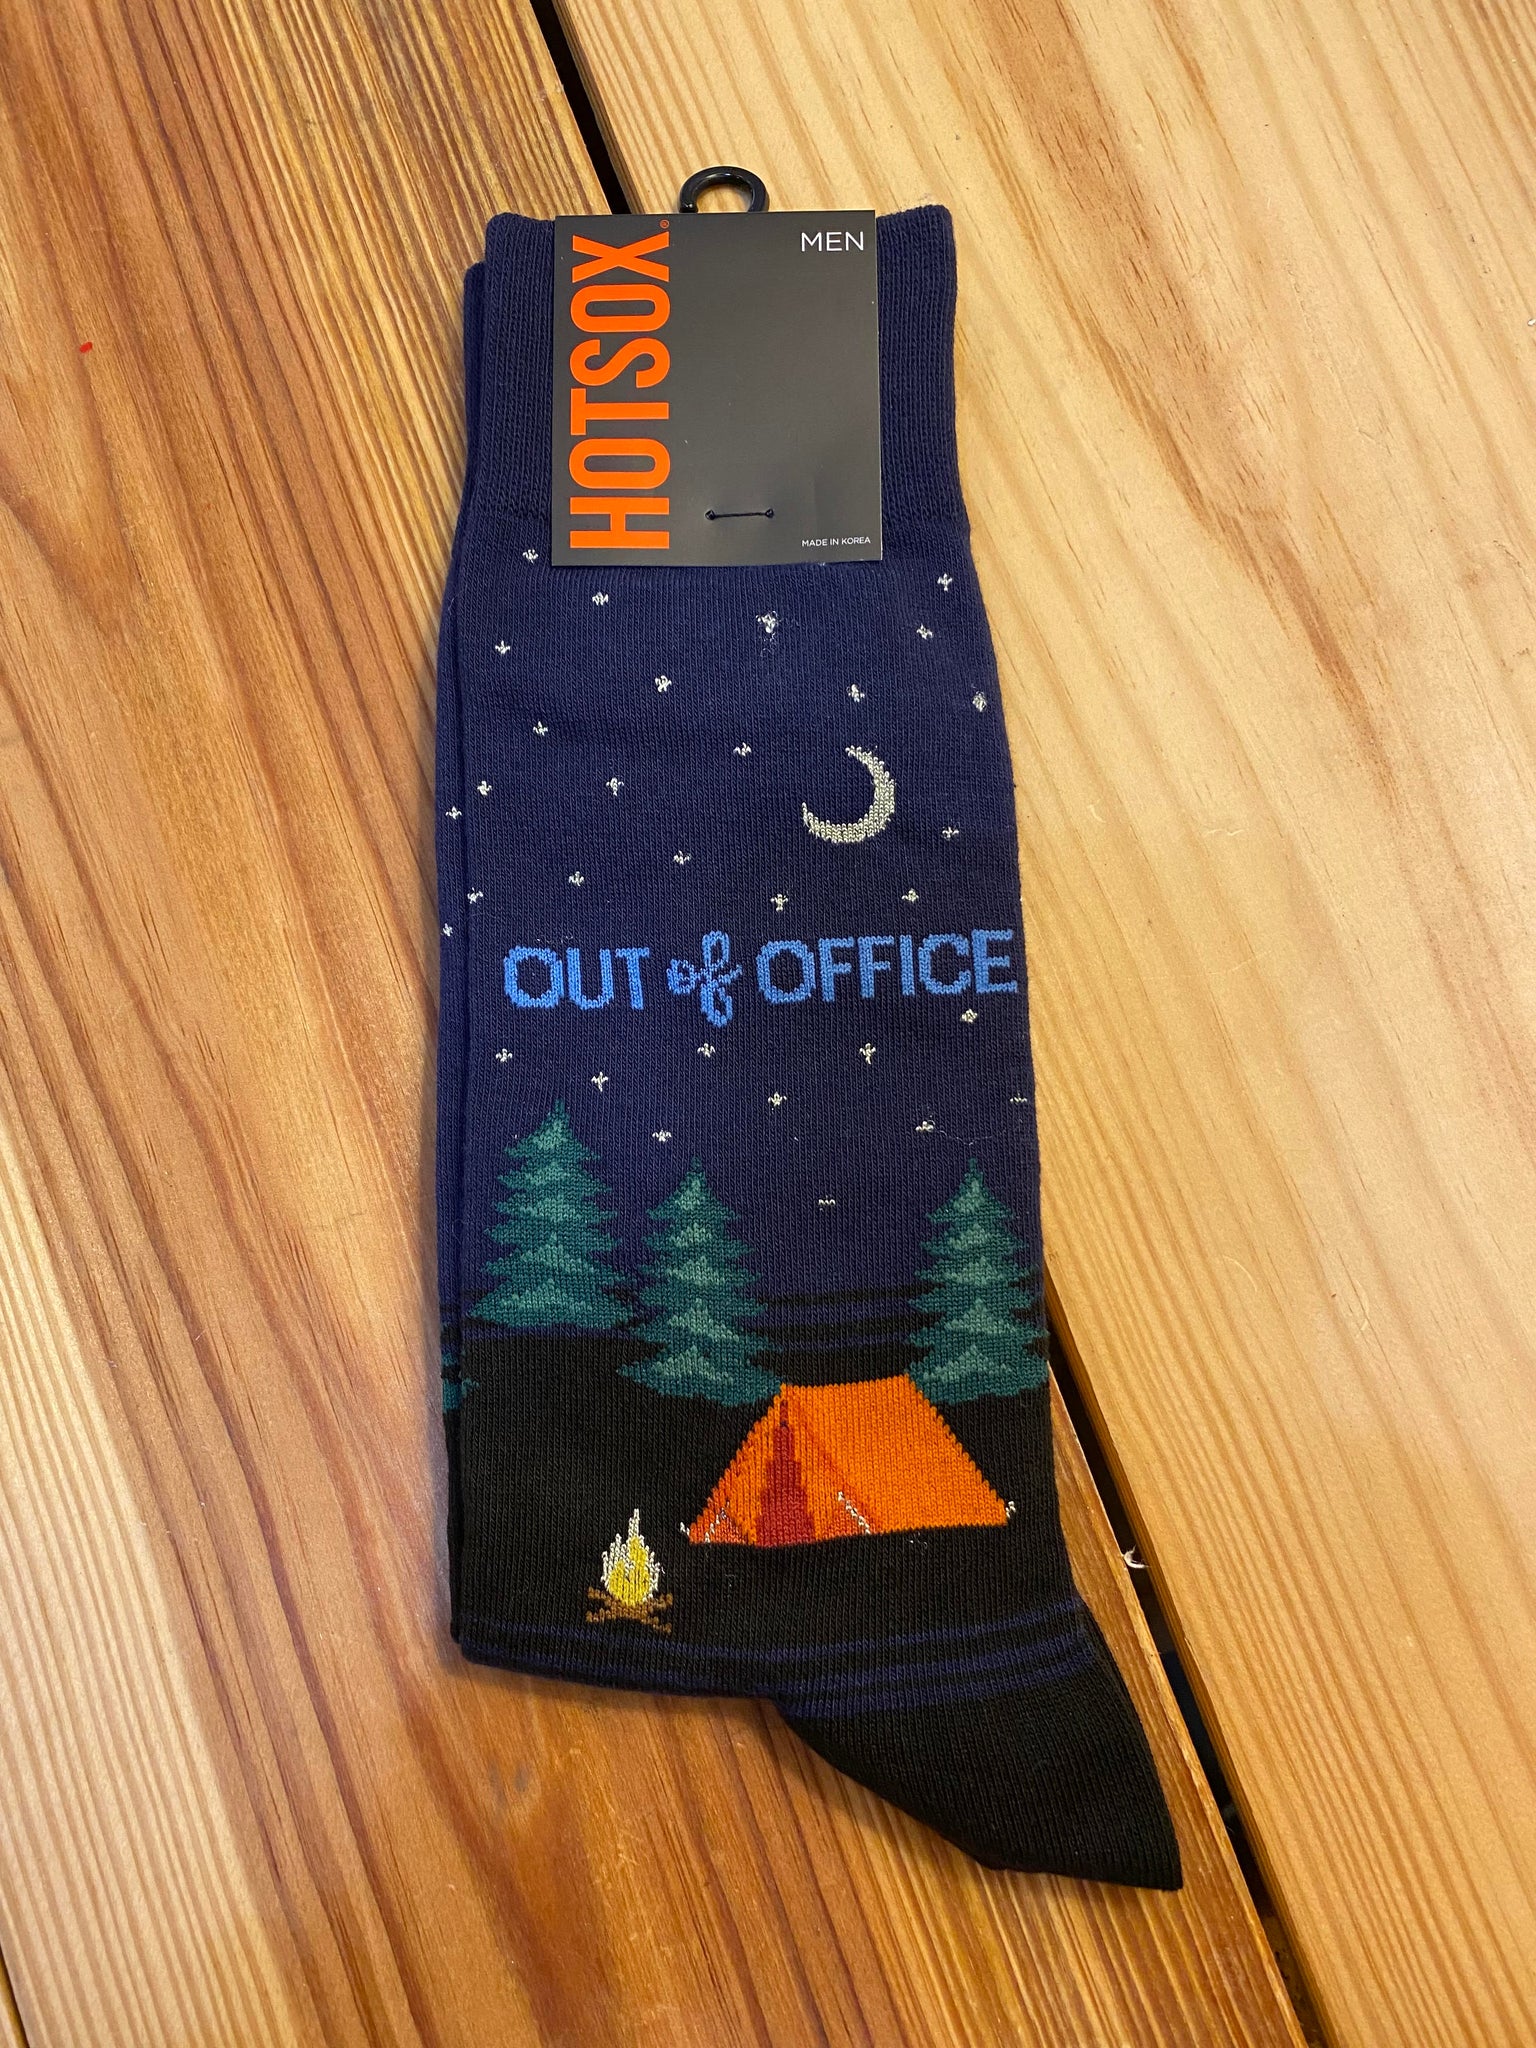 Hot Sox Men - Out of Office